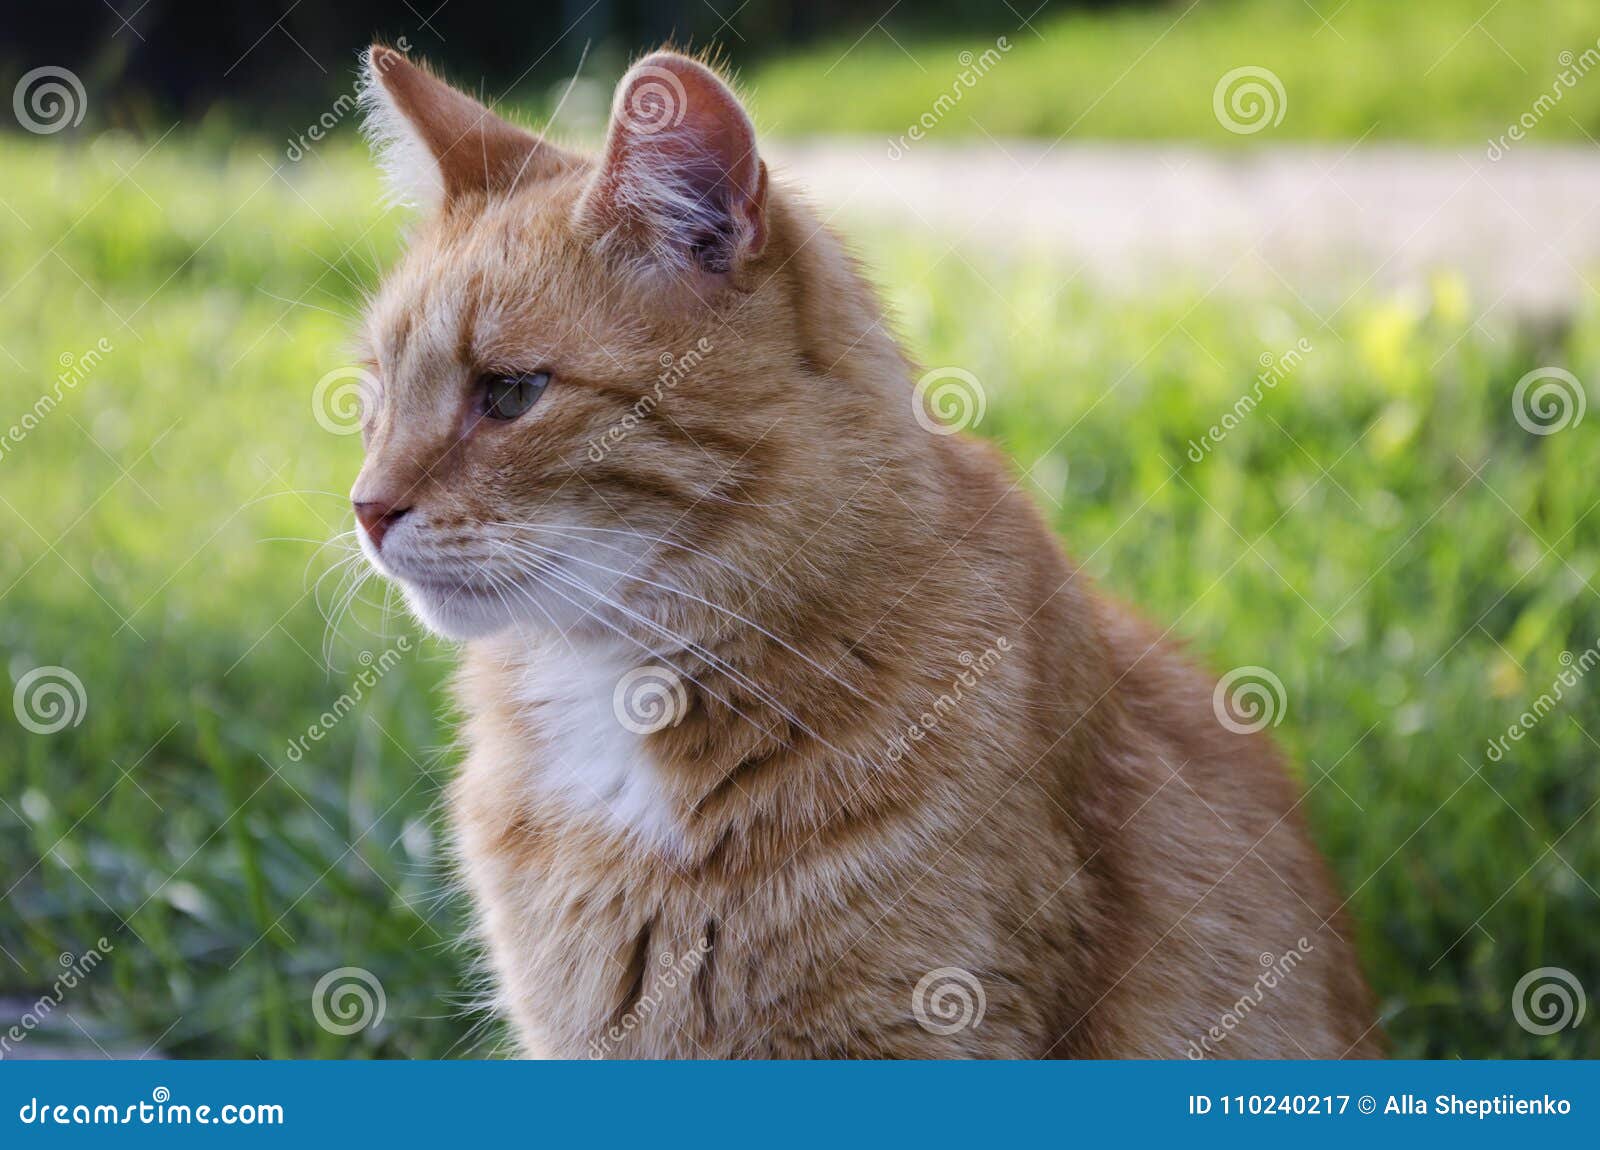 Beautiful red-haired cat stock image. Image of muzzle - 110240217